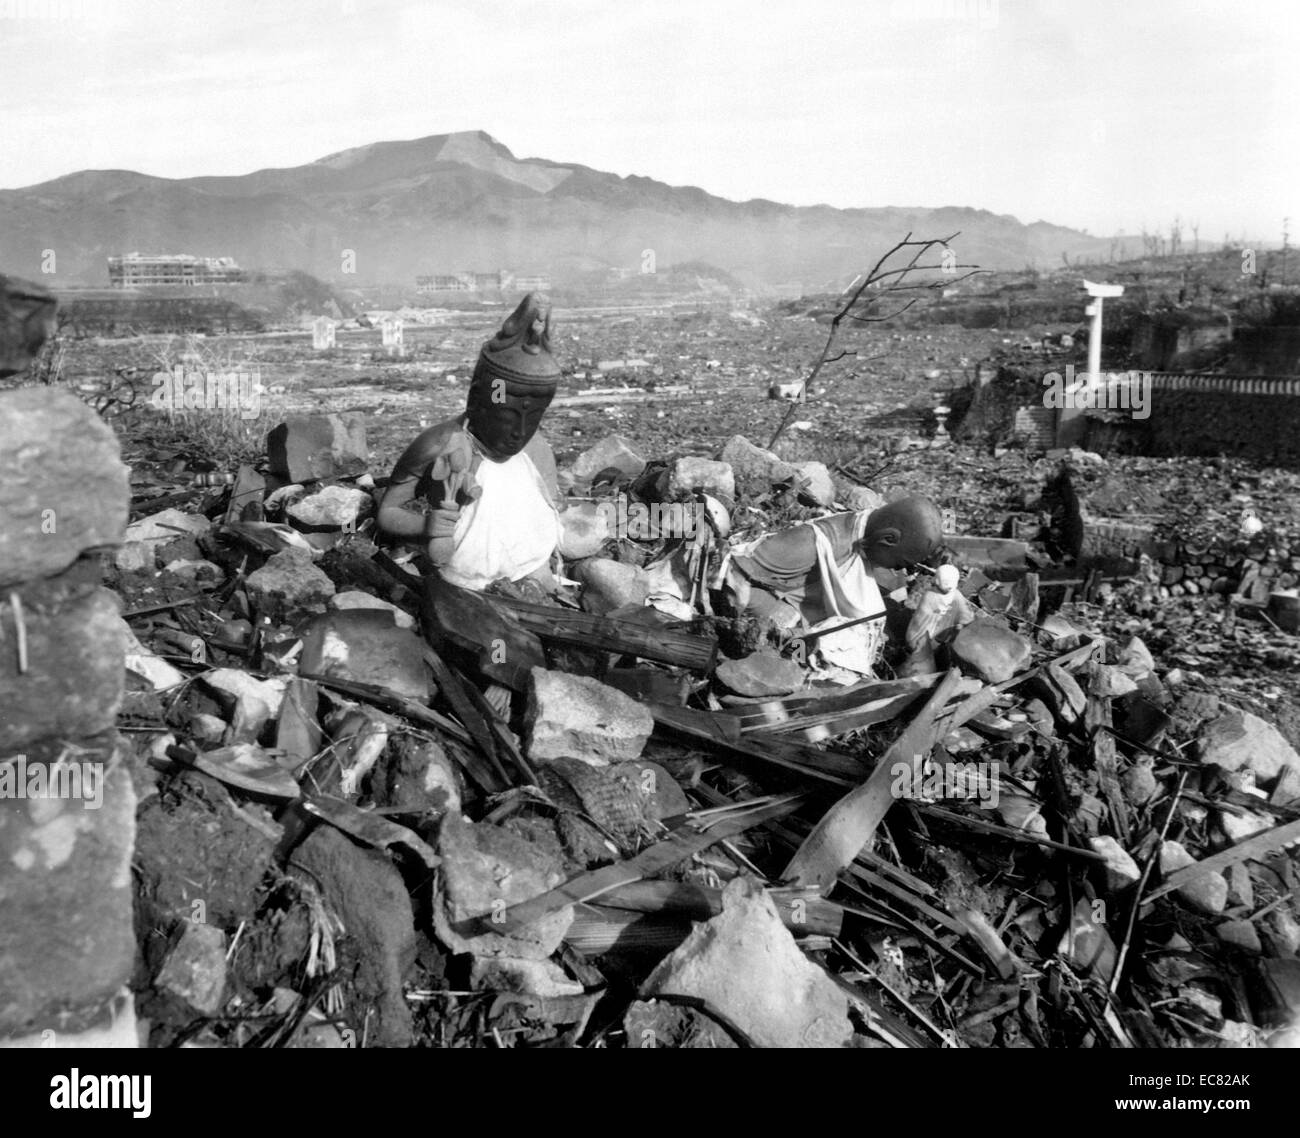 devastation after the nuclear bombing of Nagasaki; Japan, 9th August 1945 during world war two. Stock Photo